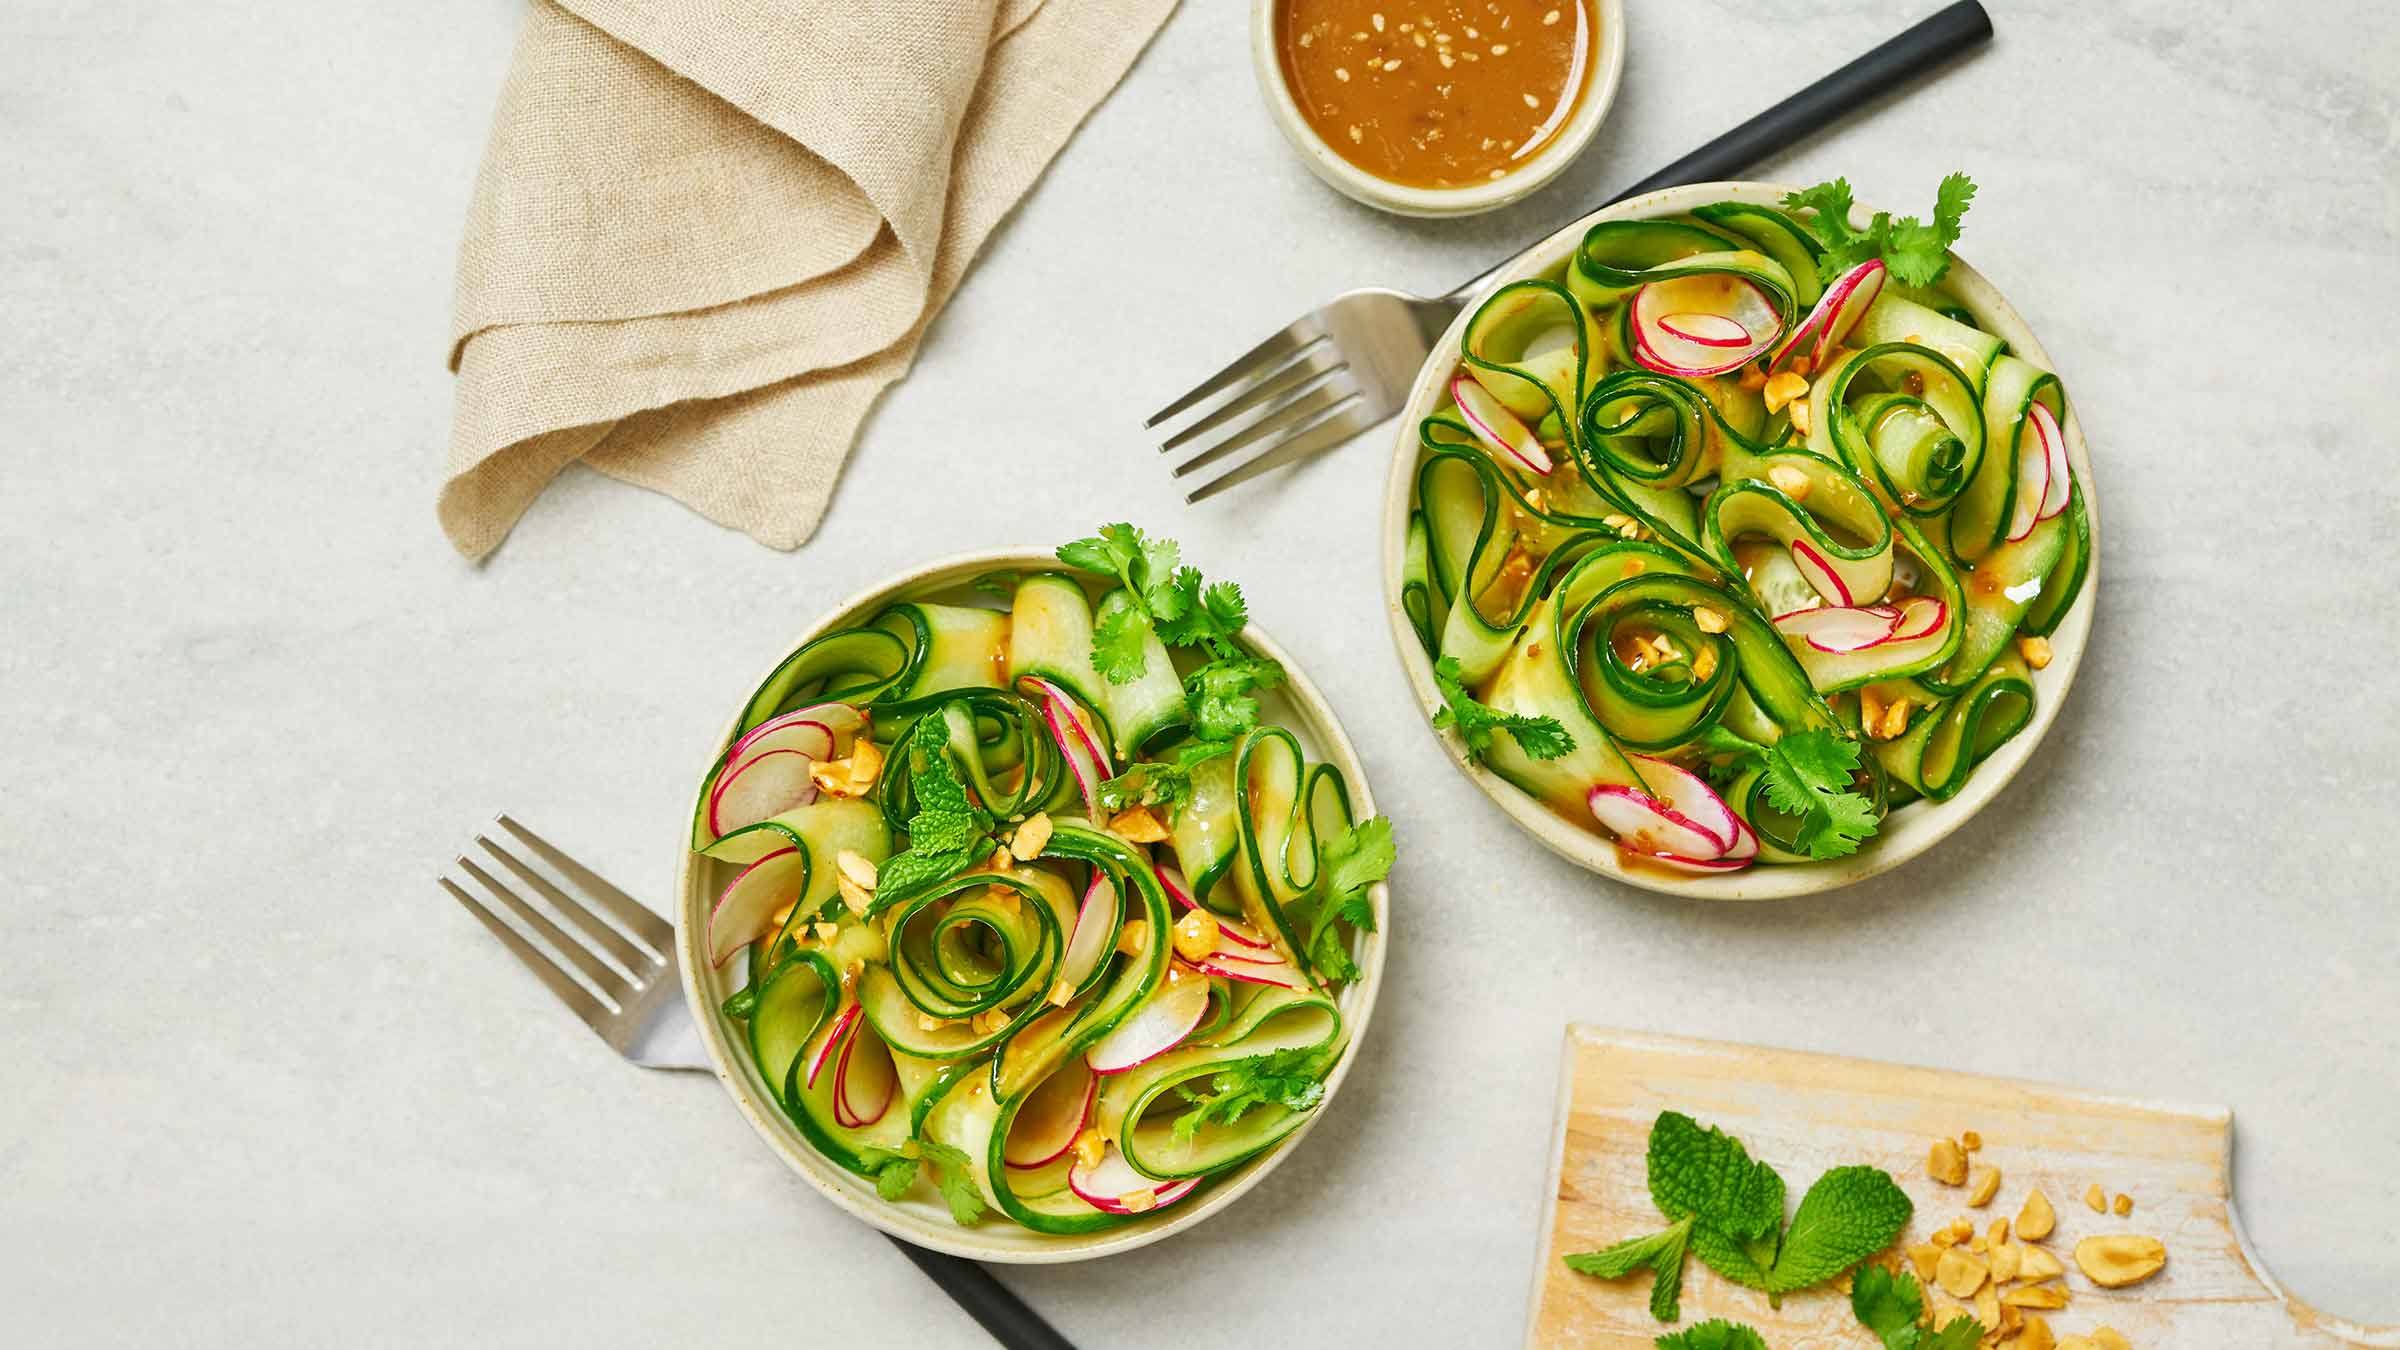 Cucumber Ribbons and Herb Salad